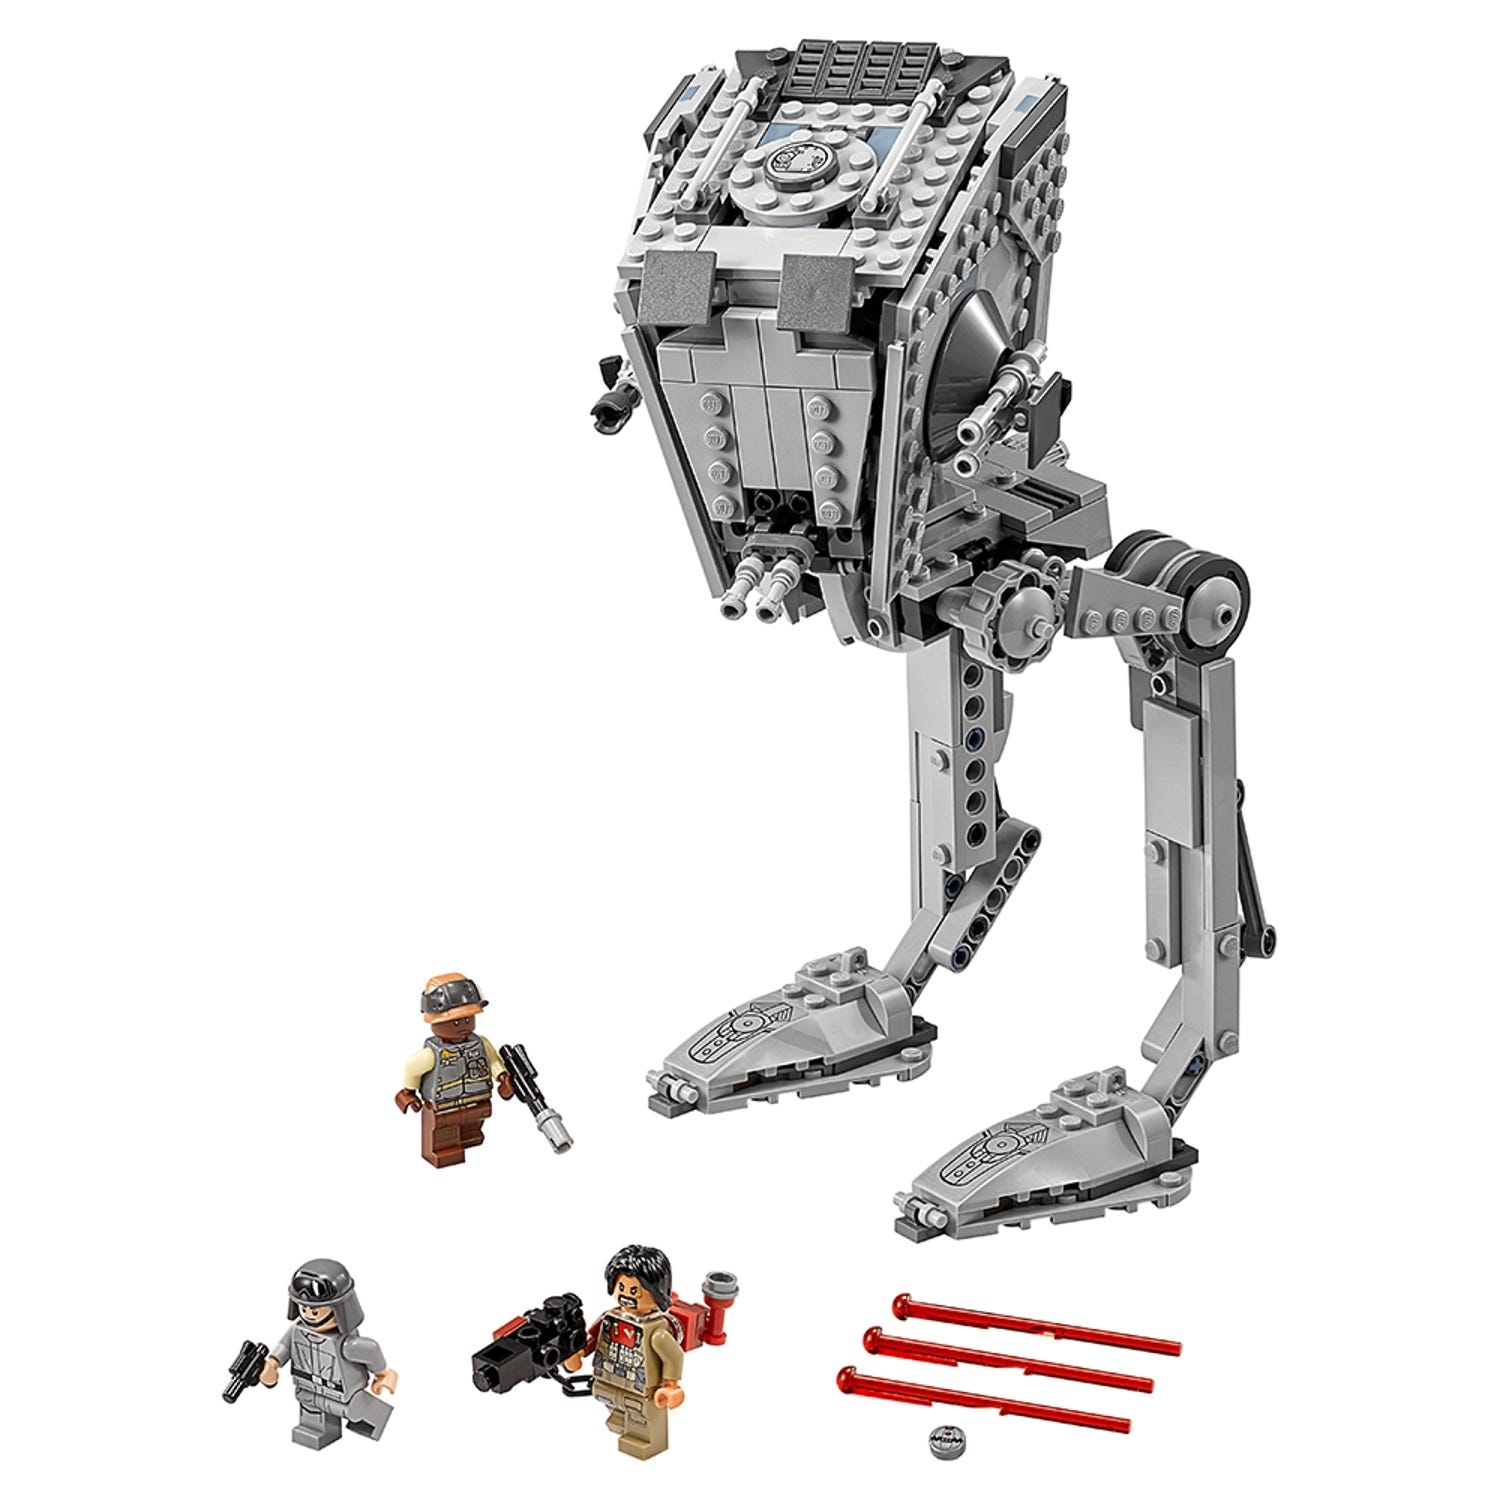 At St Walker Star Wars Buy Online At The Official Lego Shop Gb